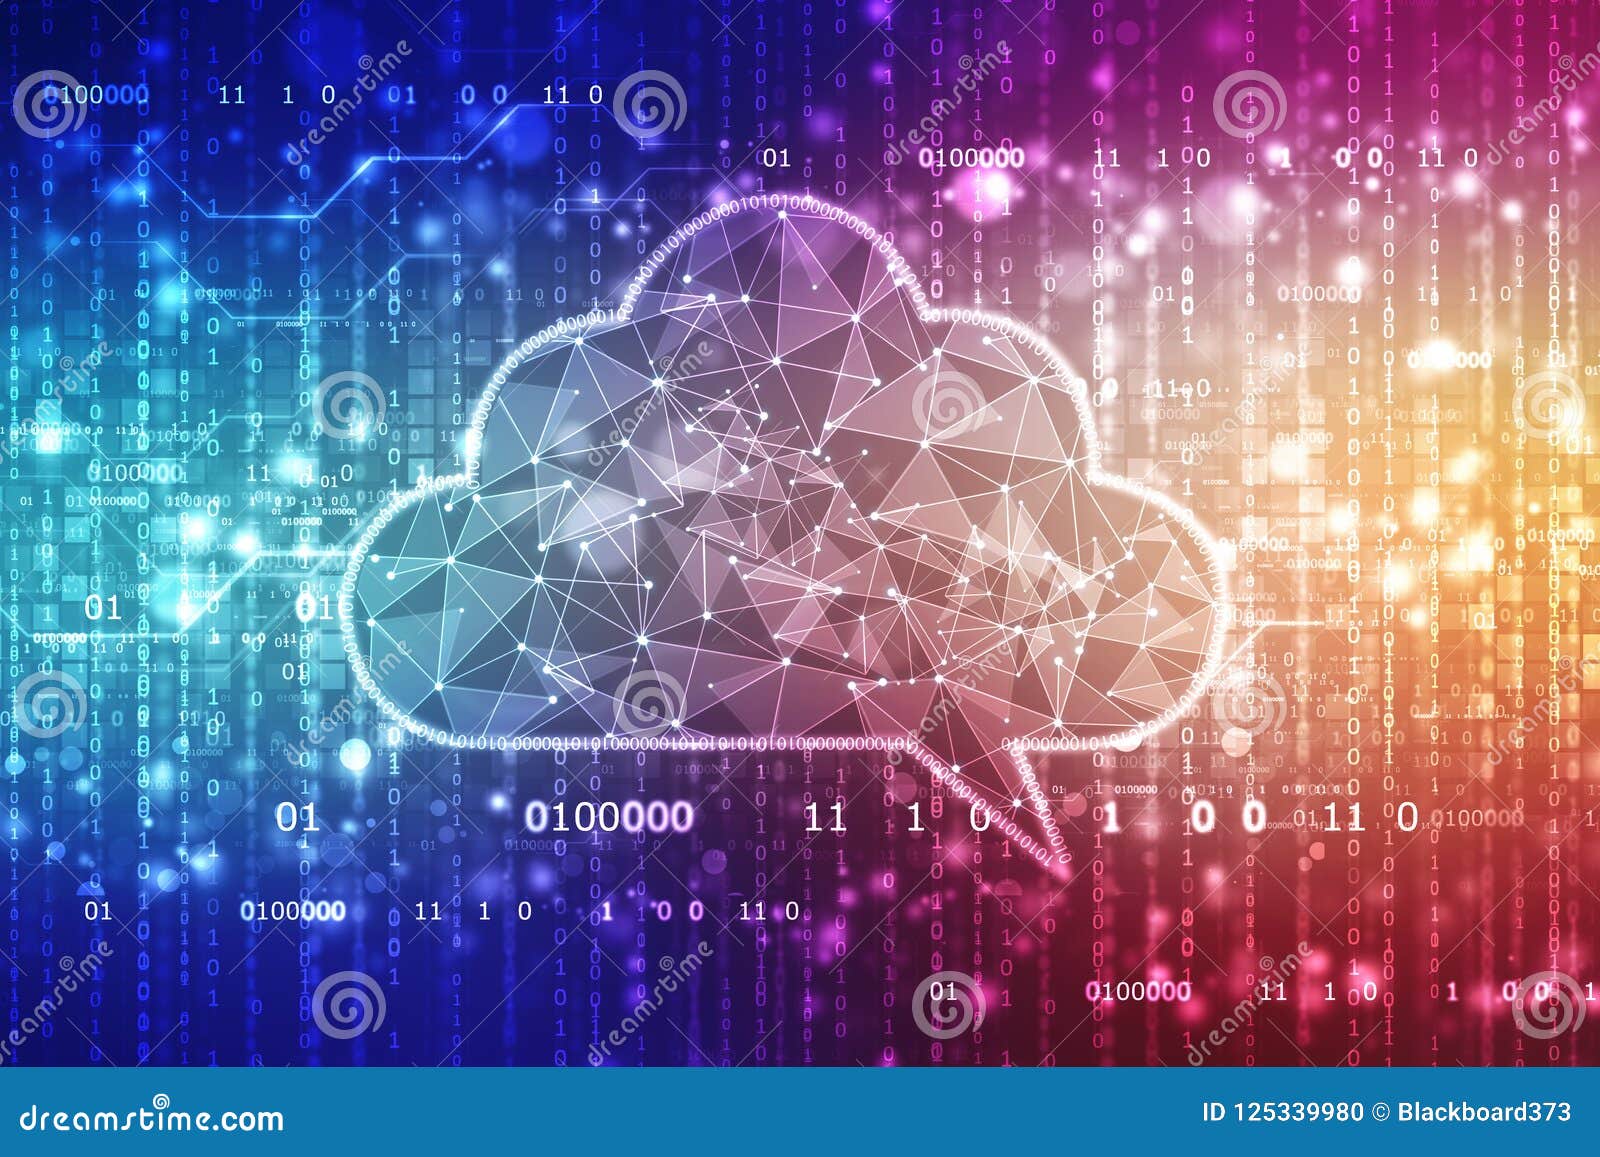 cloud computing technology background, cloud with binary in abstract background